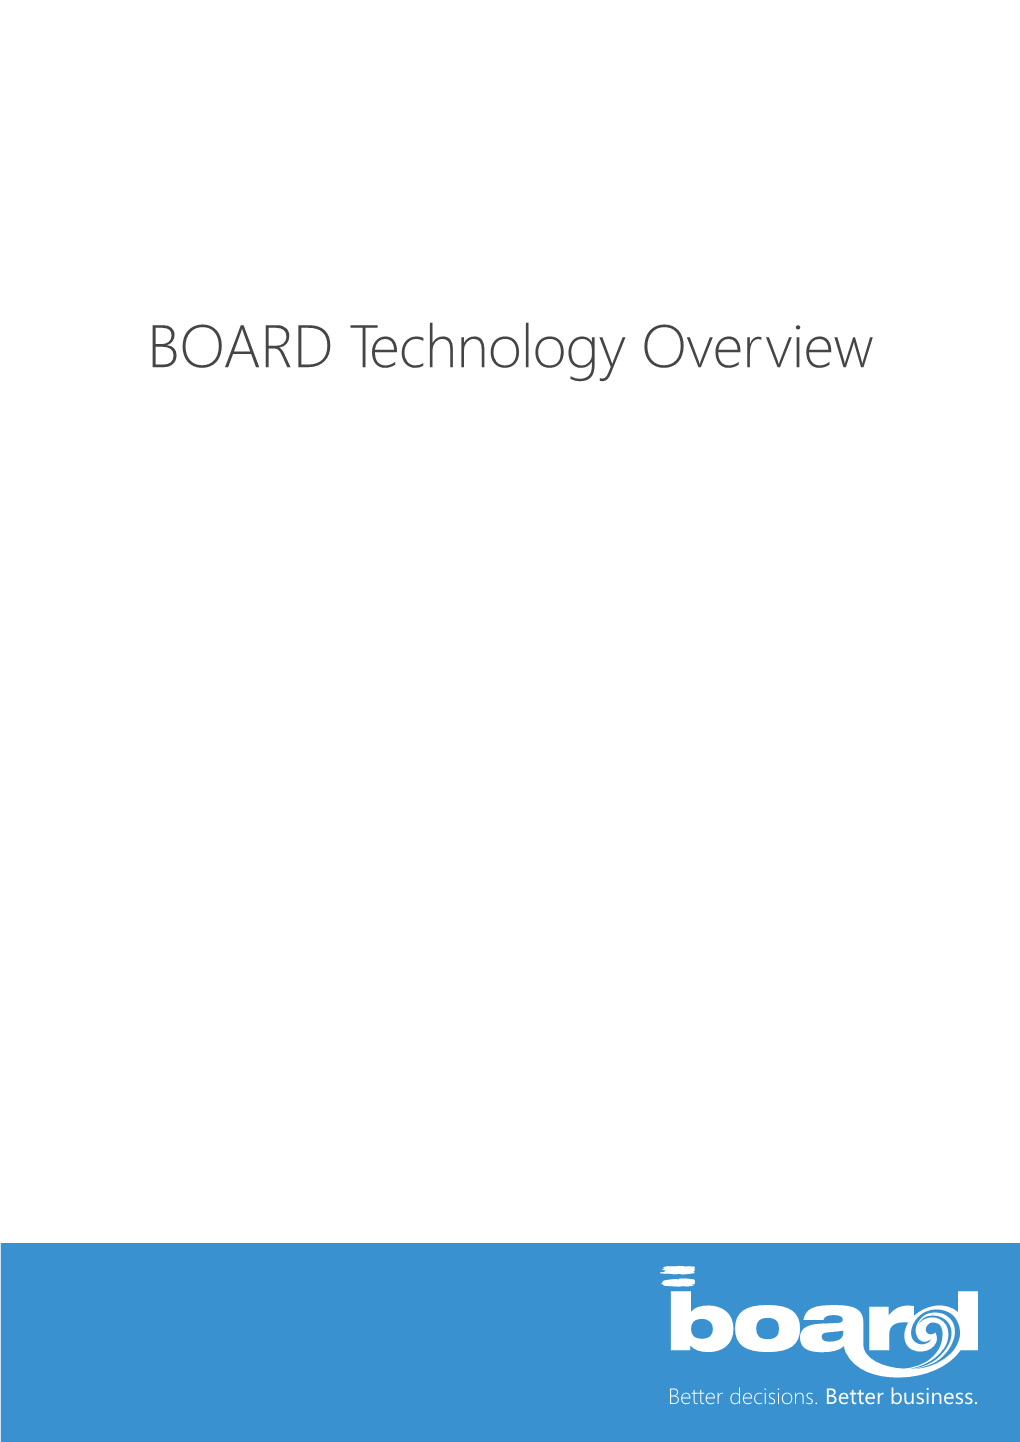 BOARD Technology Overview 2 Contents Contents 3 CONTENTS